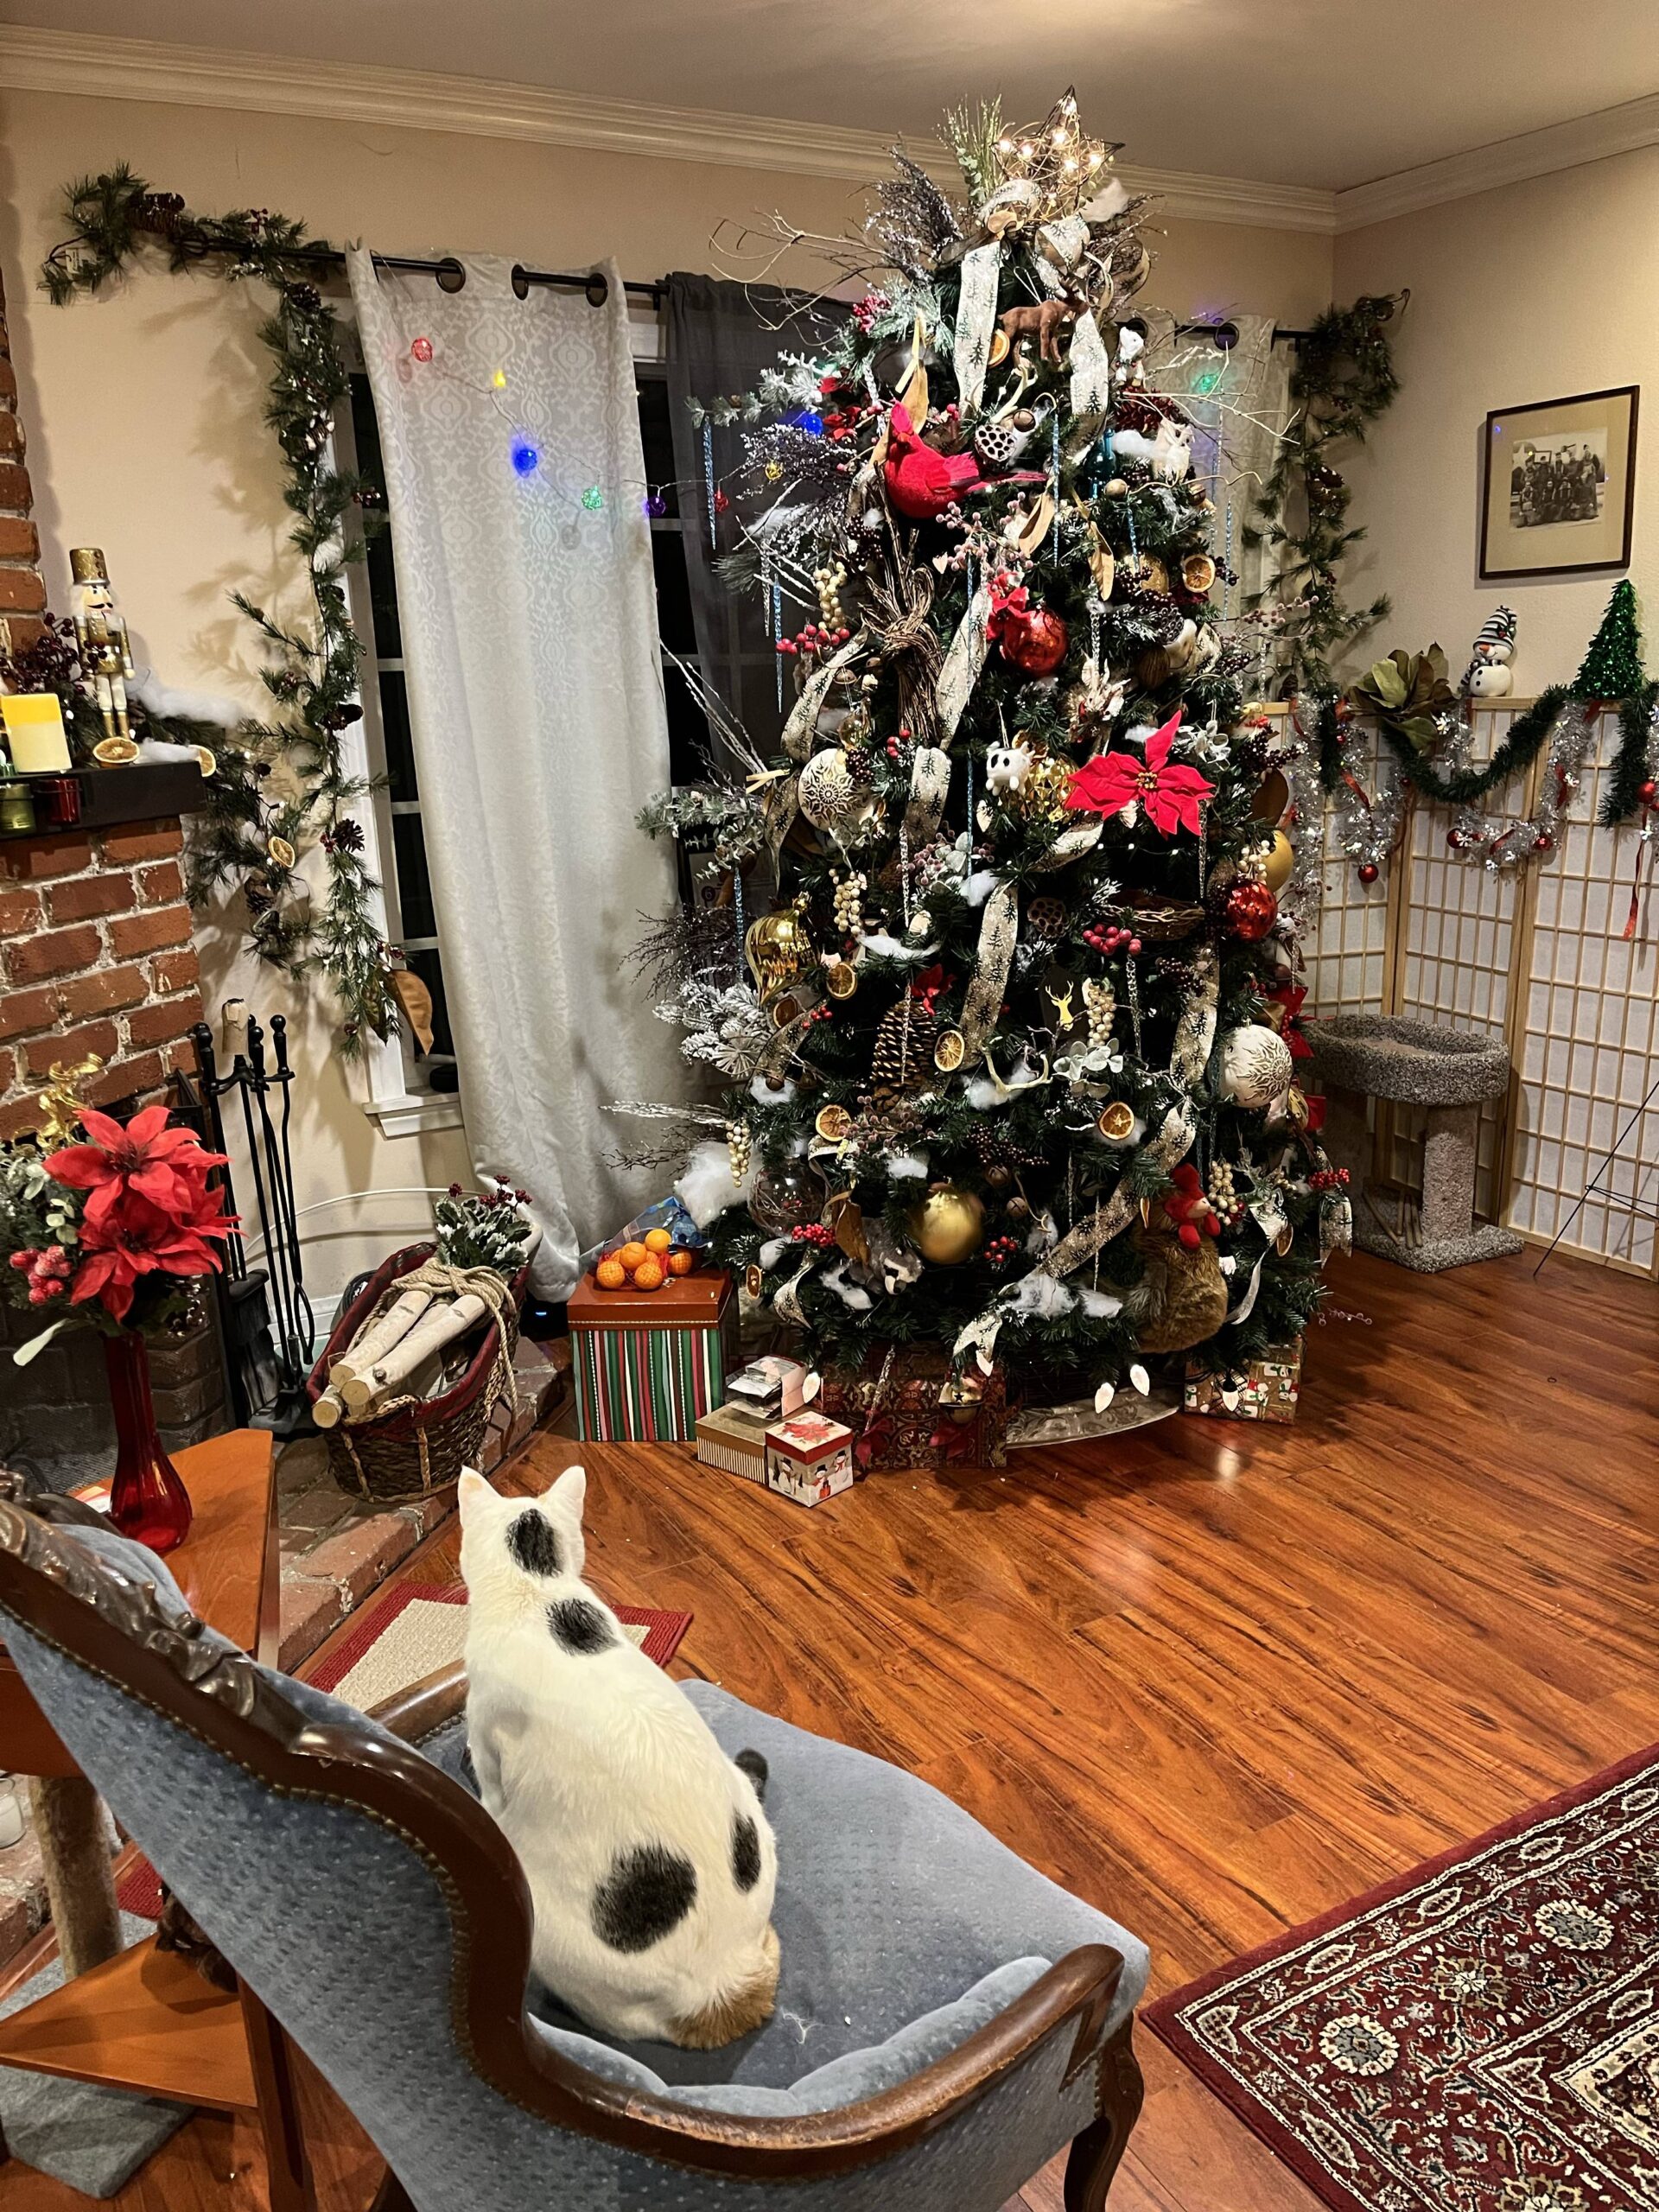 My cat, Dotty. And a better shot of the tree.